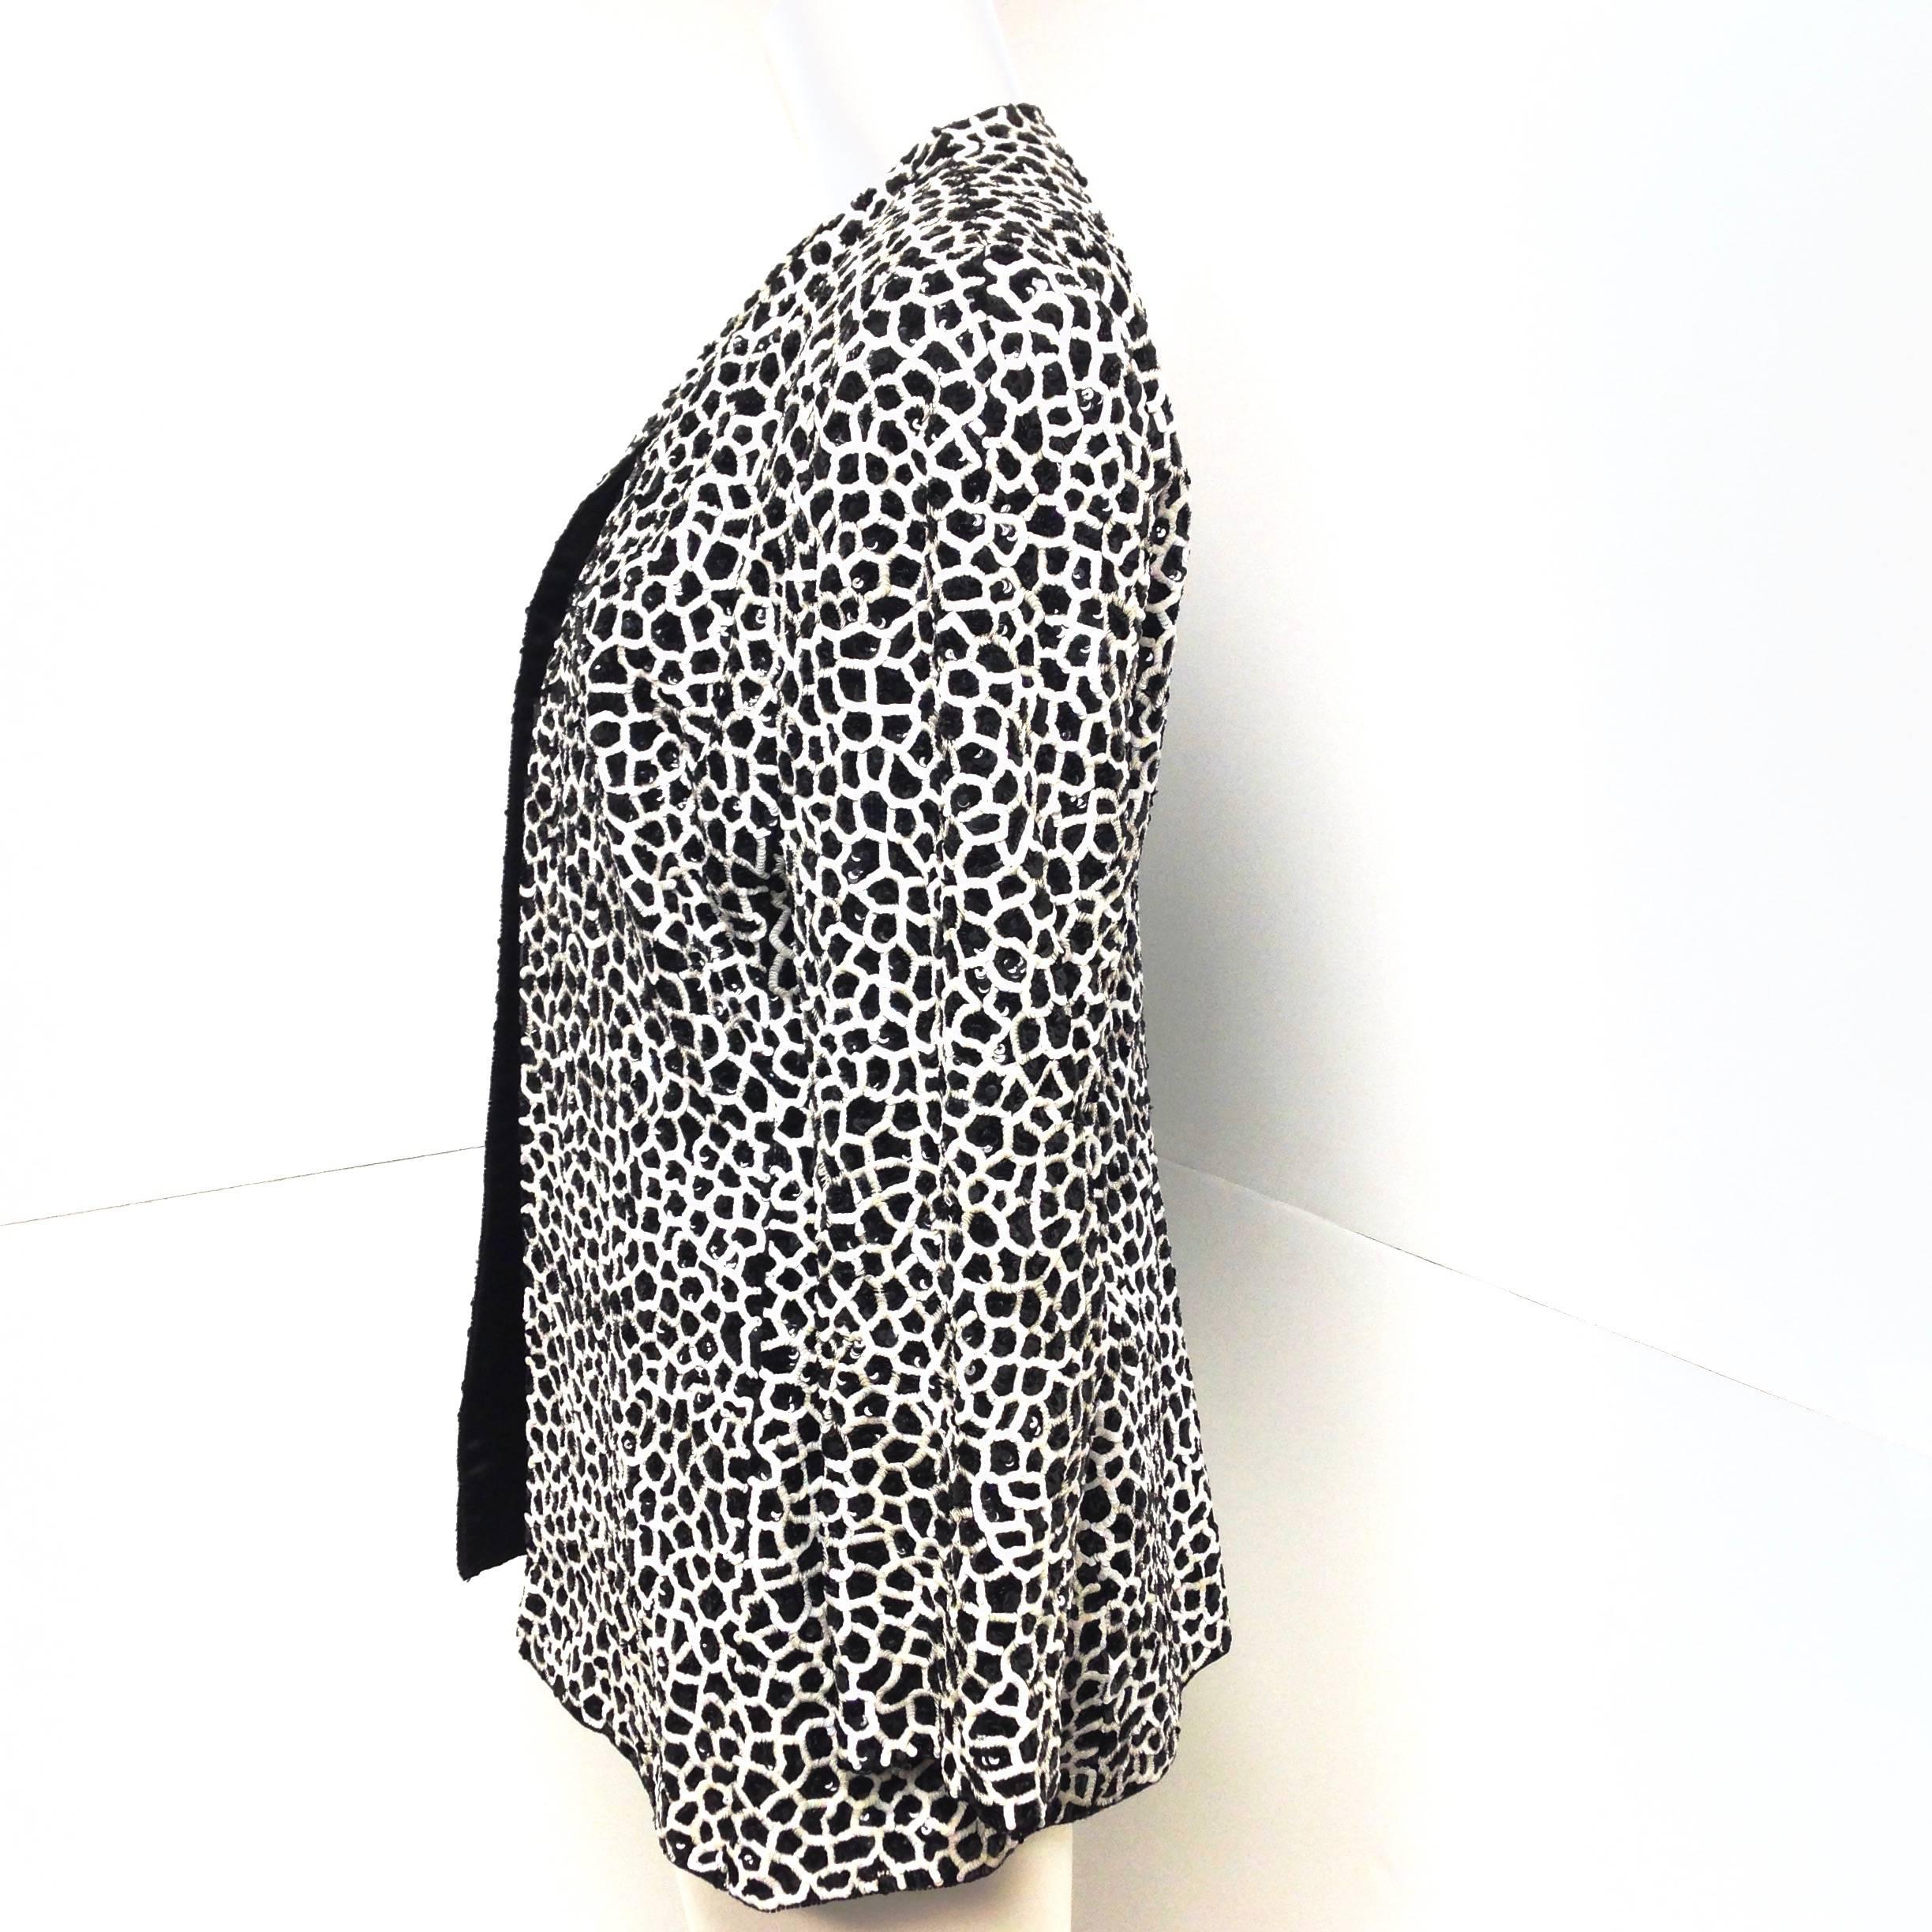 Amazing Bill Blass black and white sequined jacket from the 1980s. 
It is entirely covered with small black and iridescent white sequins, edges trimmed with black beads, open front.
 It is tagged size 12, made in the USA with the union label. I